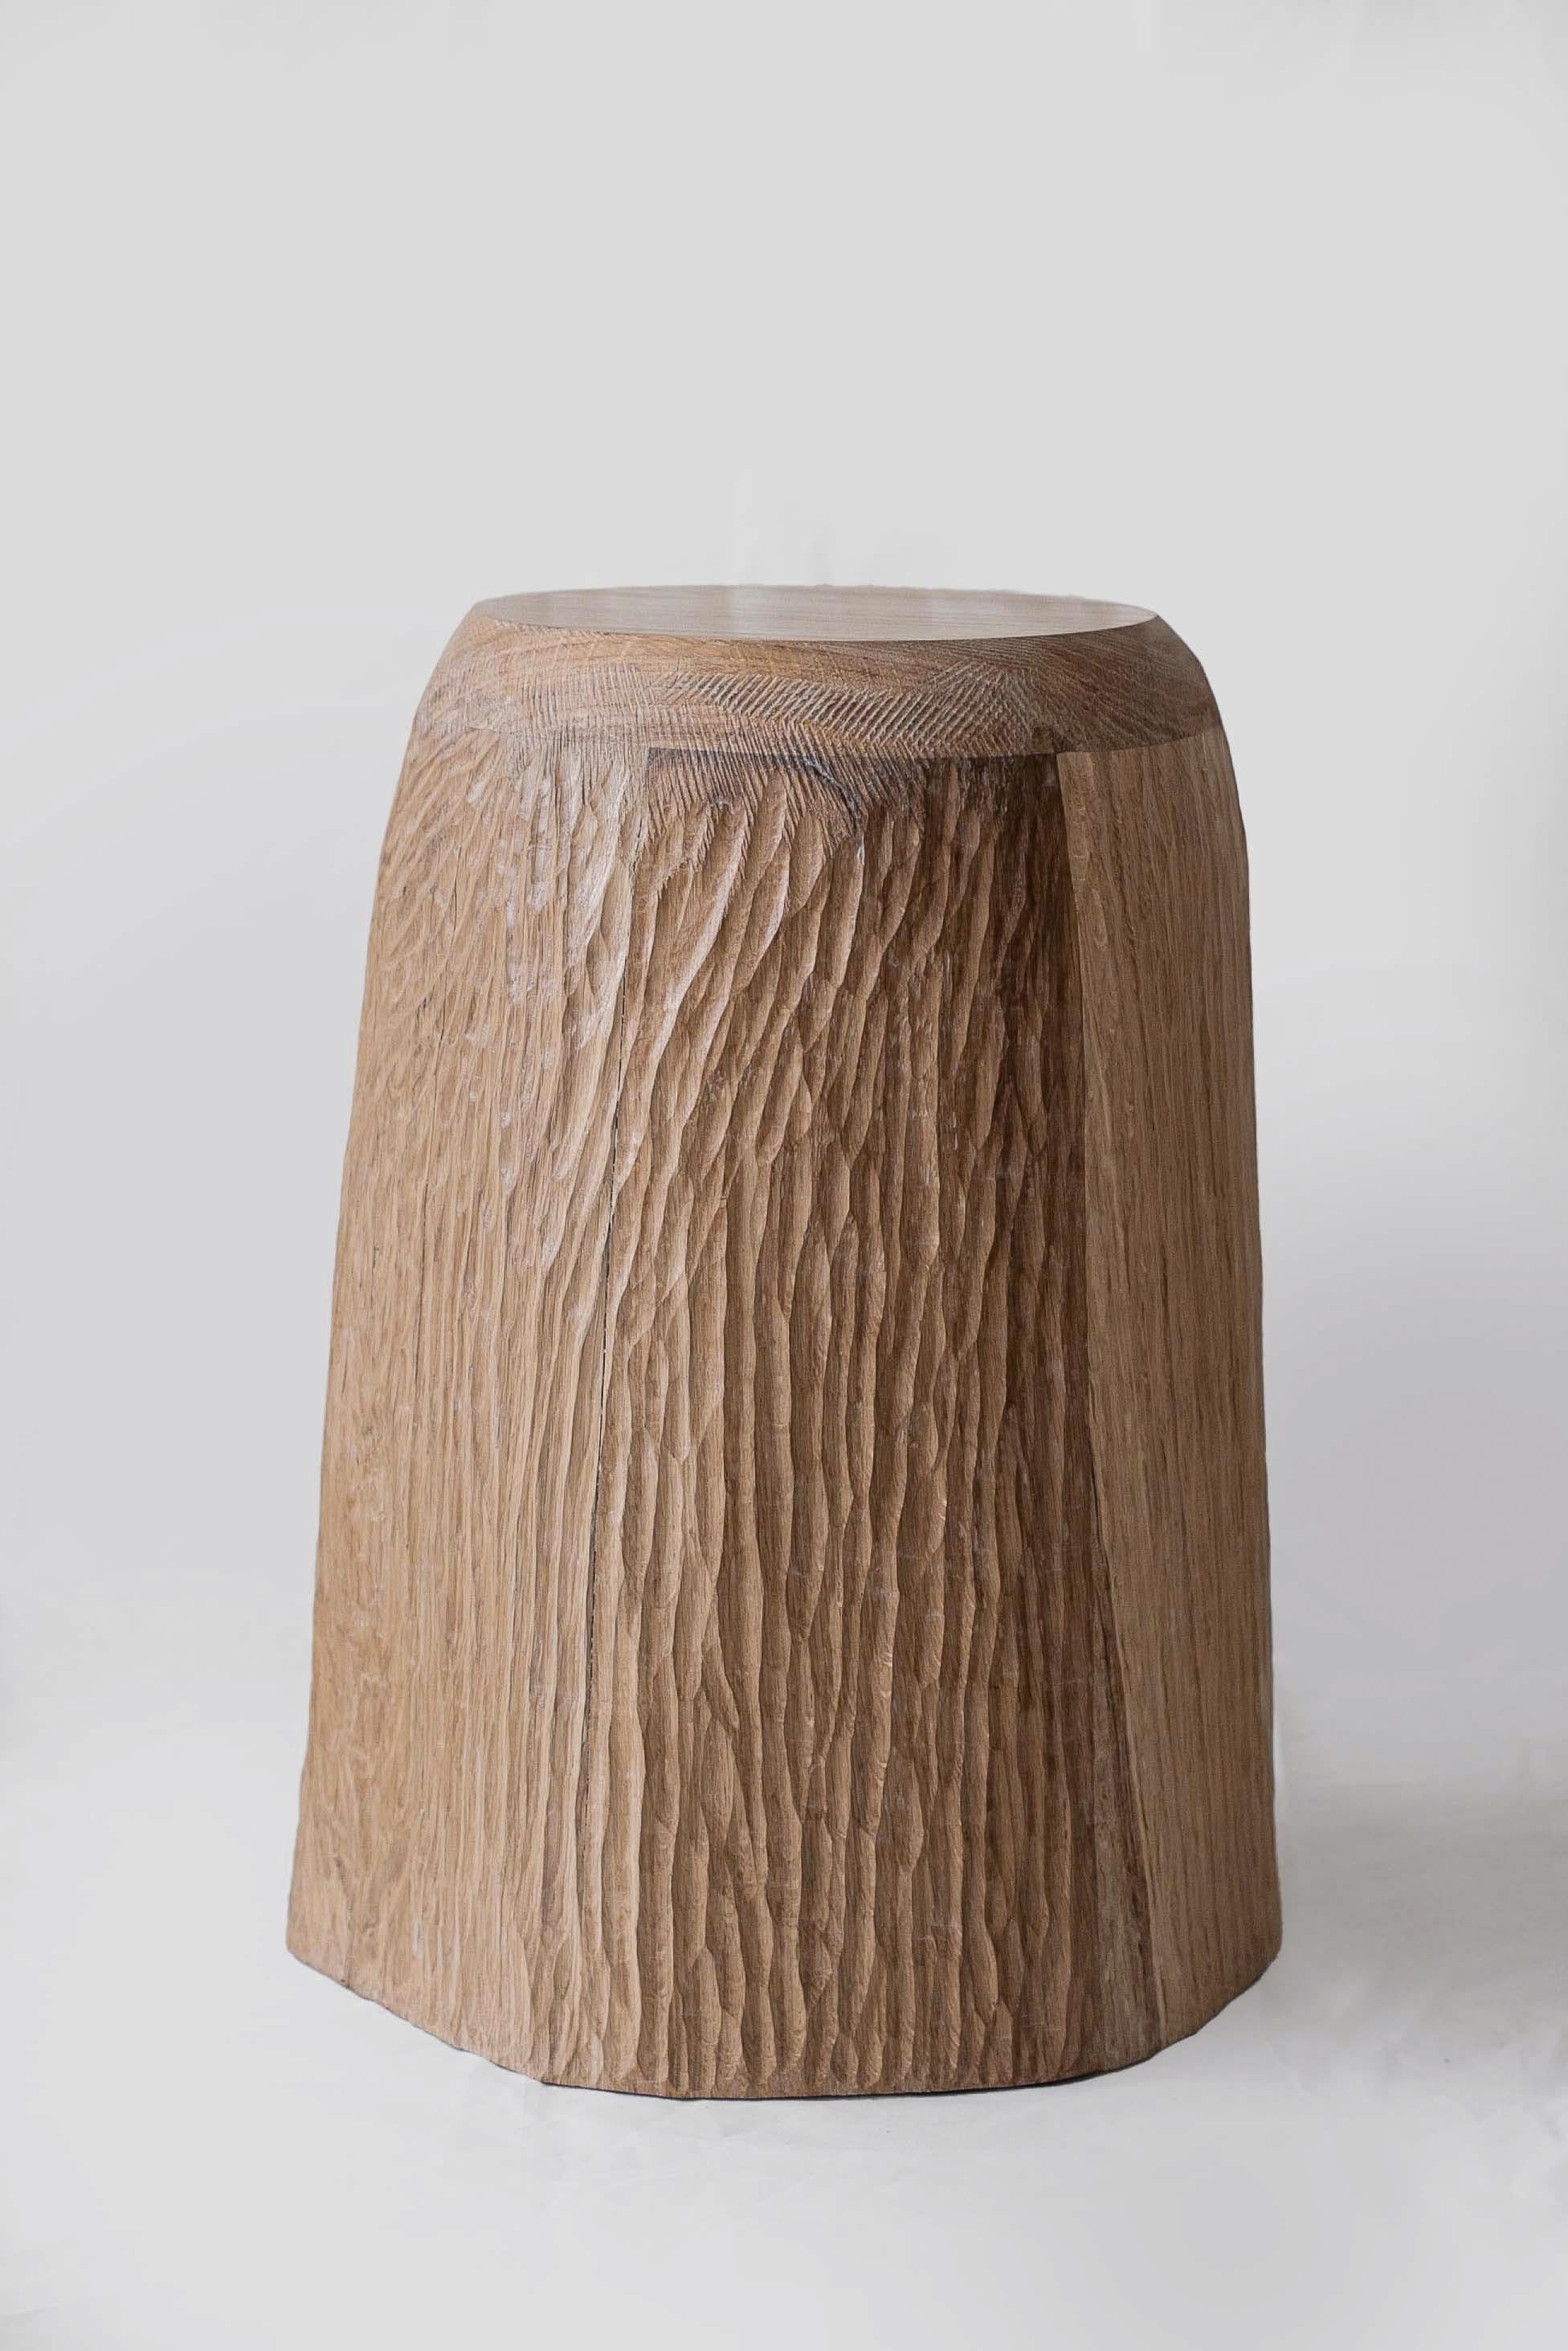 Intuitive Archaisme Massive Stool by Cedric Breisacher
Dimension: D 40 x H 45 cm
Materials: Oak.
Finish: Natural wax-oiled.

Designer-sculptor, Cedric Breisacher has an atypical path. Self-taught man, he followed during five years an Industrial